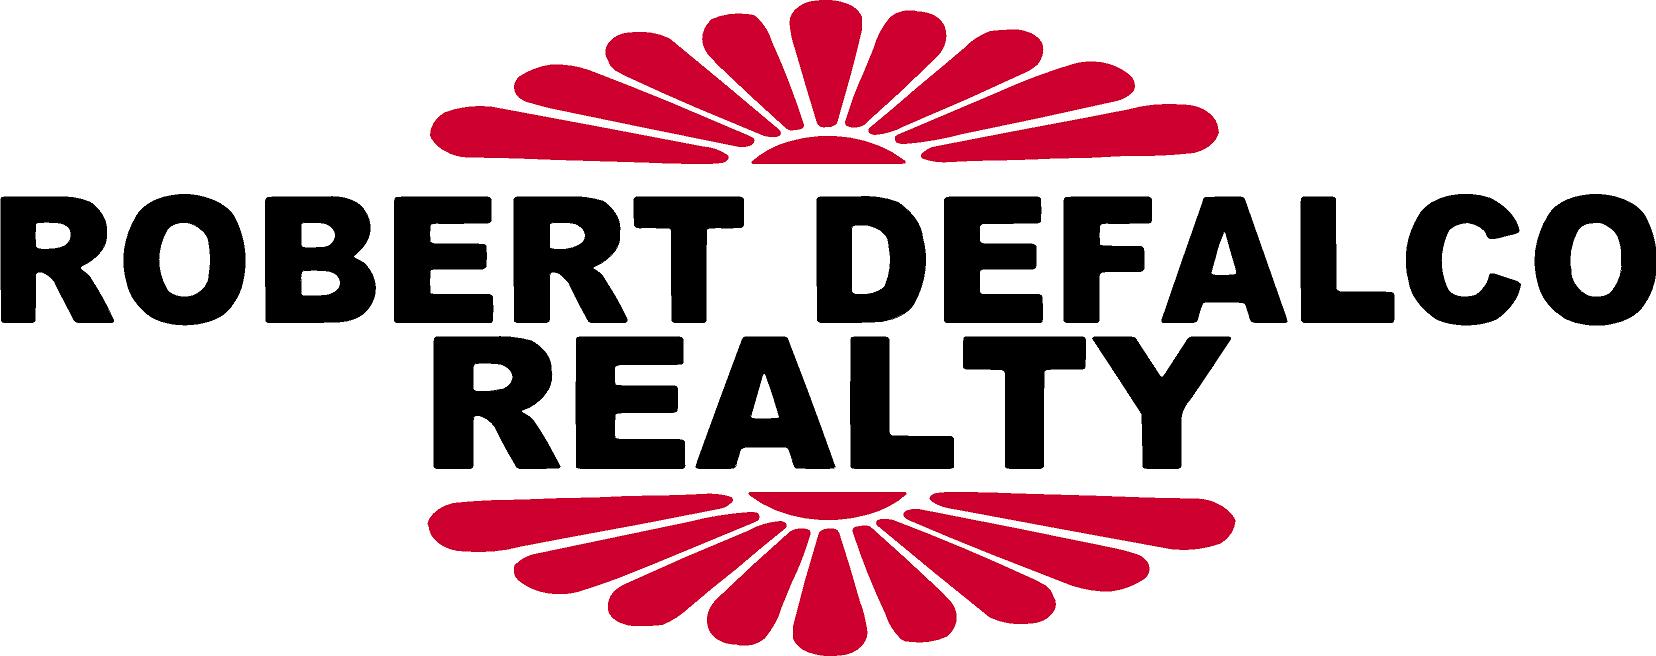 Staten Island’s #1 Real Estate Agency, Robert DeFalco Realty, is Proud to Announce Expansion